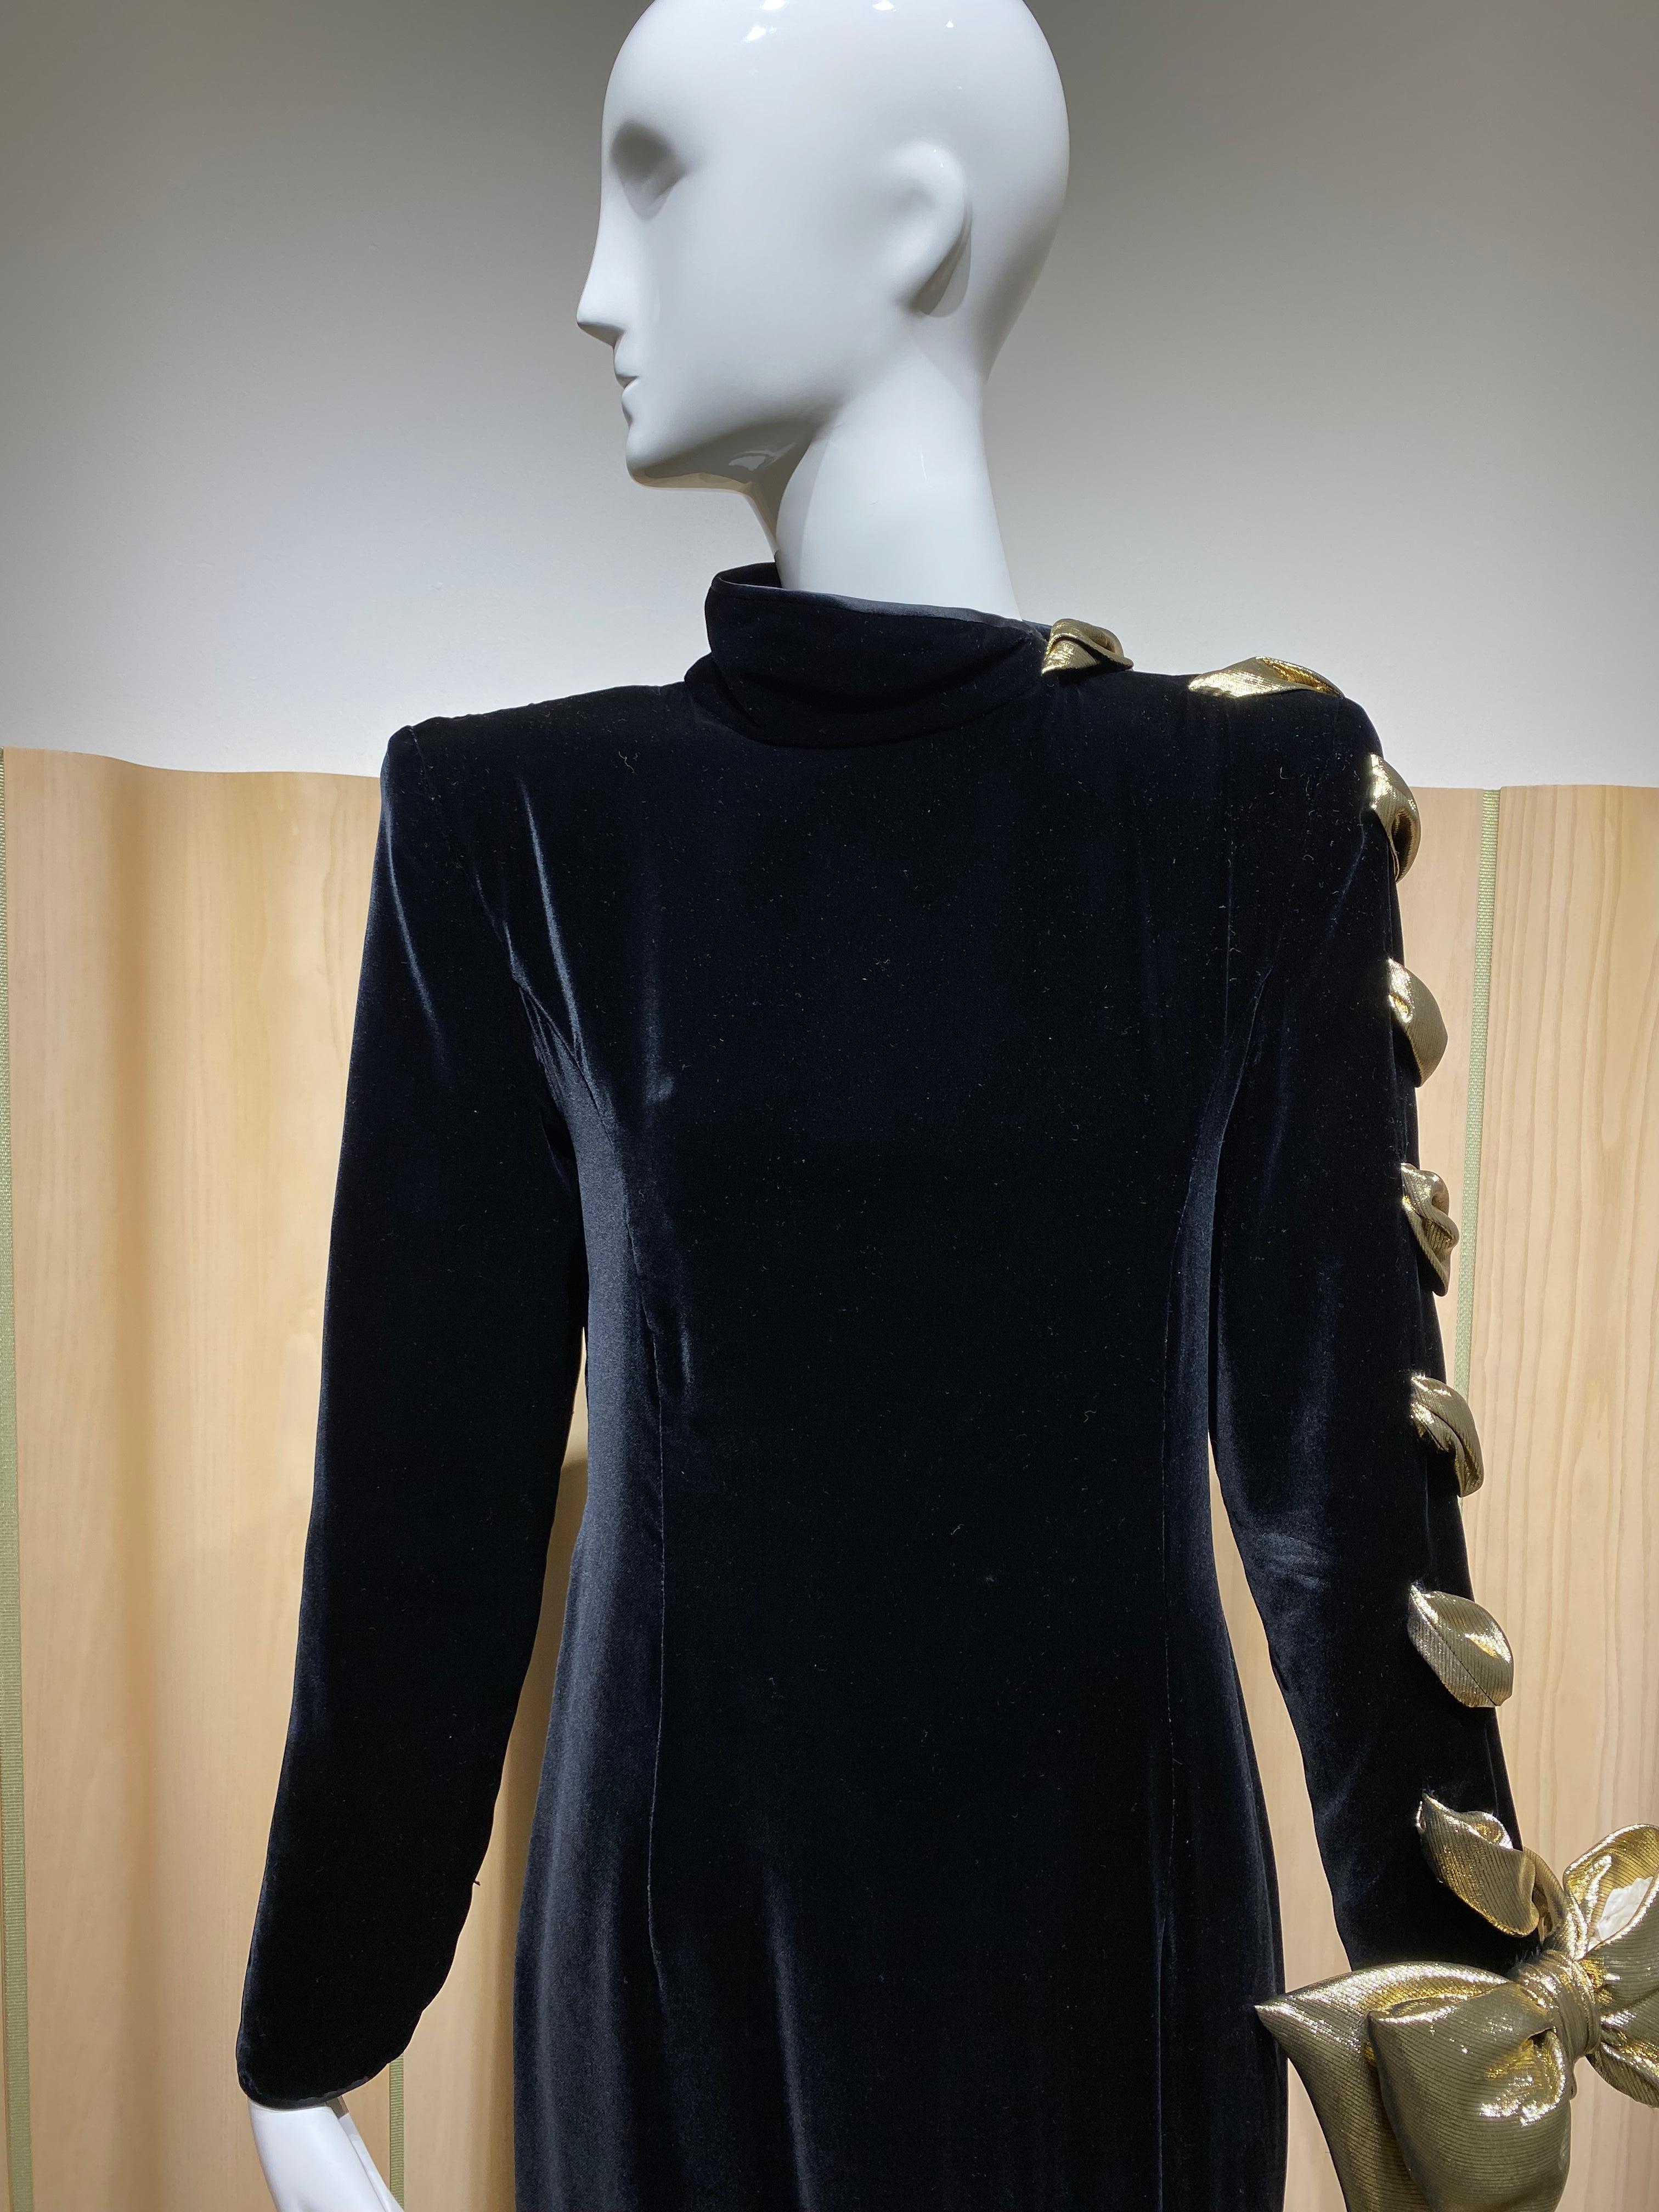 1987 Chic Valentino Black Velvet long sleeve gown with silk lame bow and exaggerated collar and shoulder pads. Perfect for evening gala or wedding.
Gown is lined in silk and its in excellent condition. 
Size: 4/6 
Measurement: B:34” / W:30” / Hip: